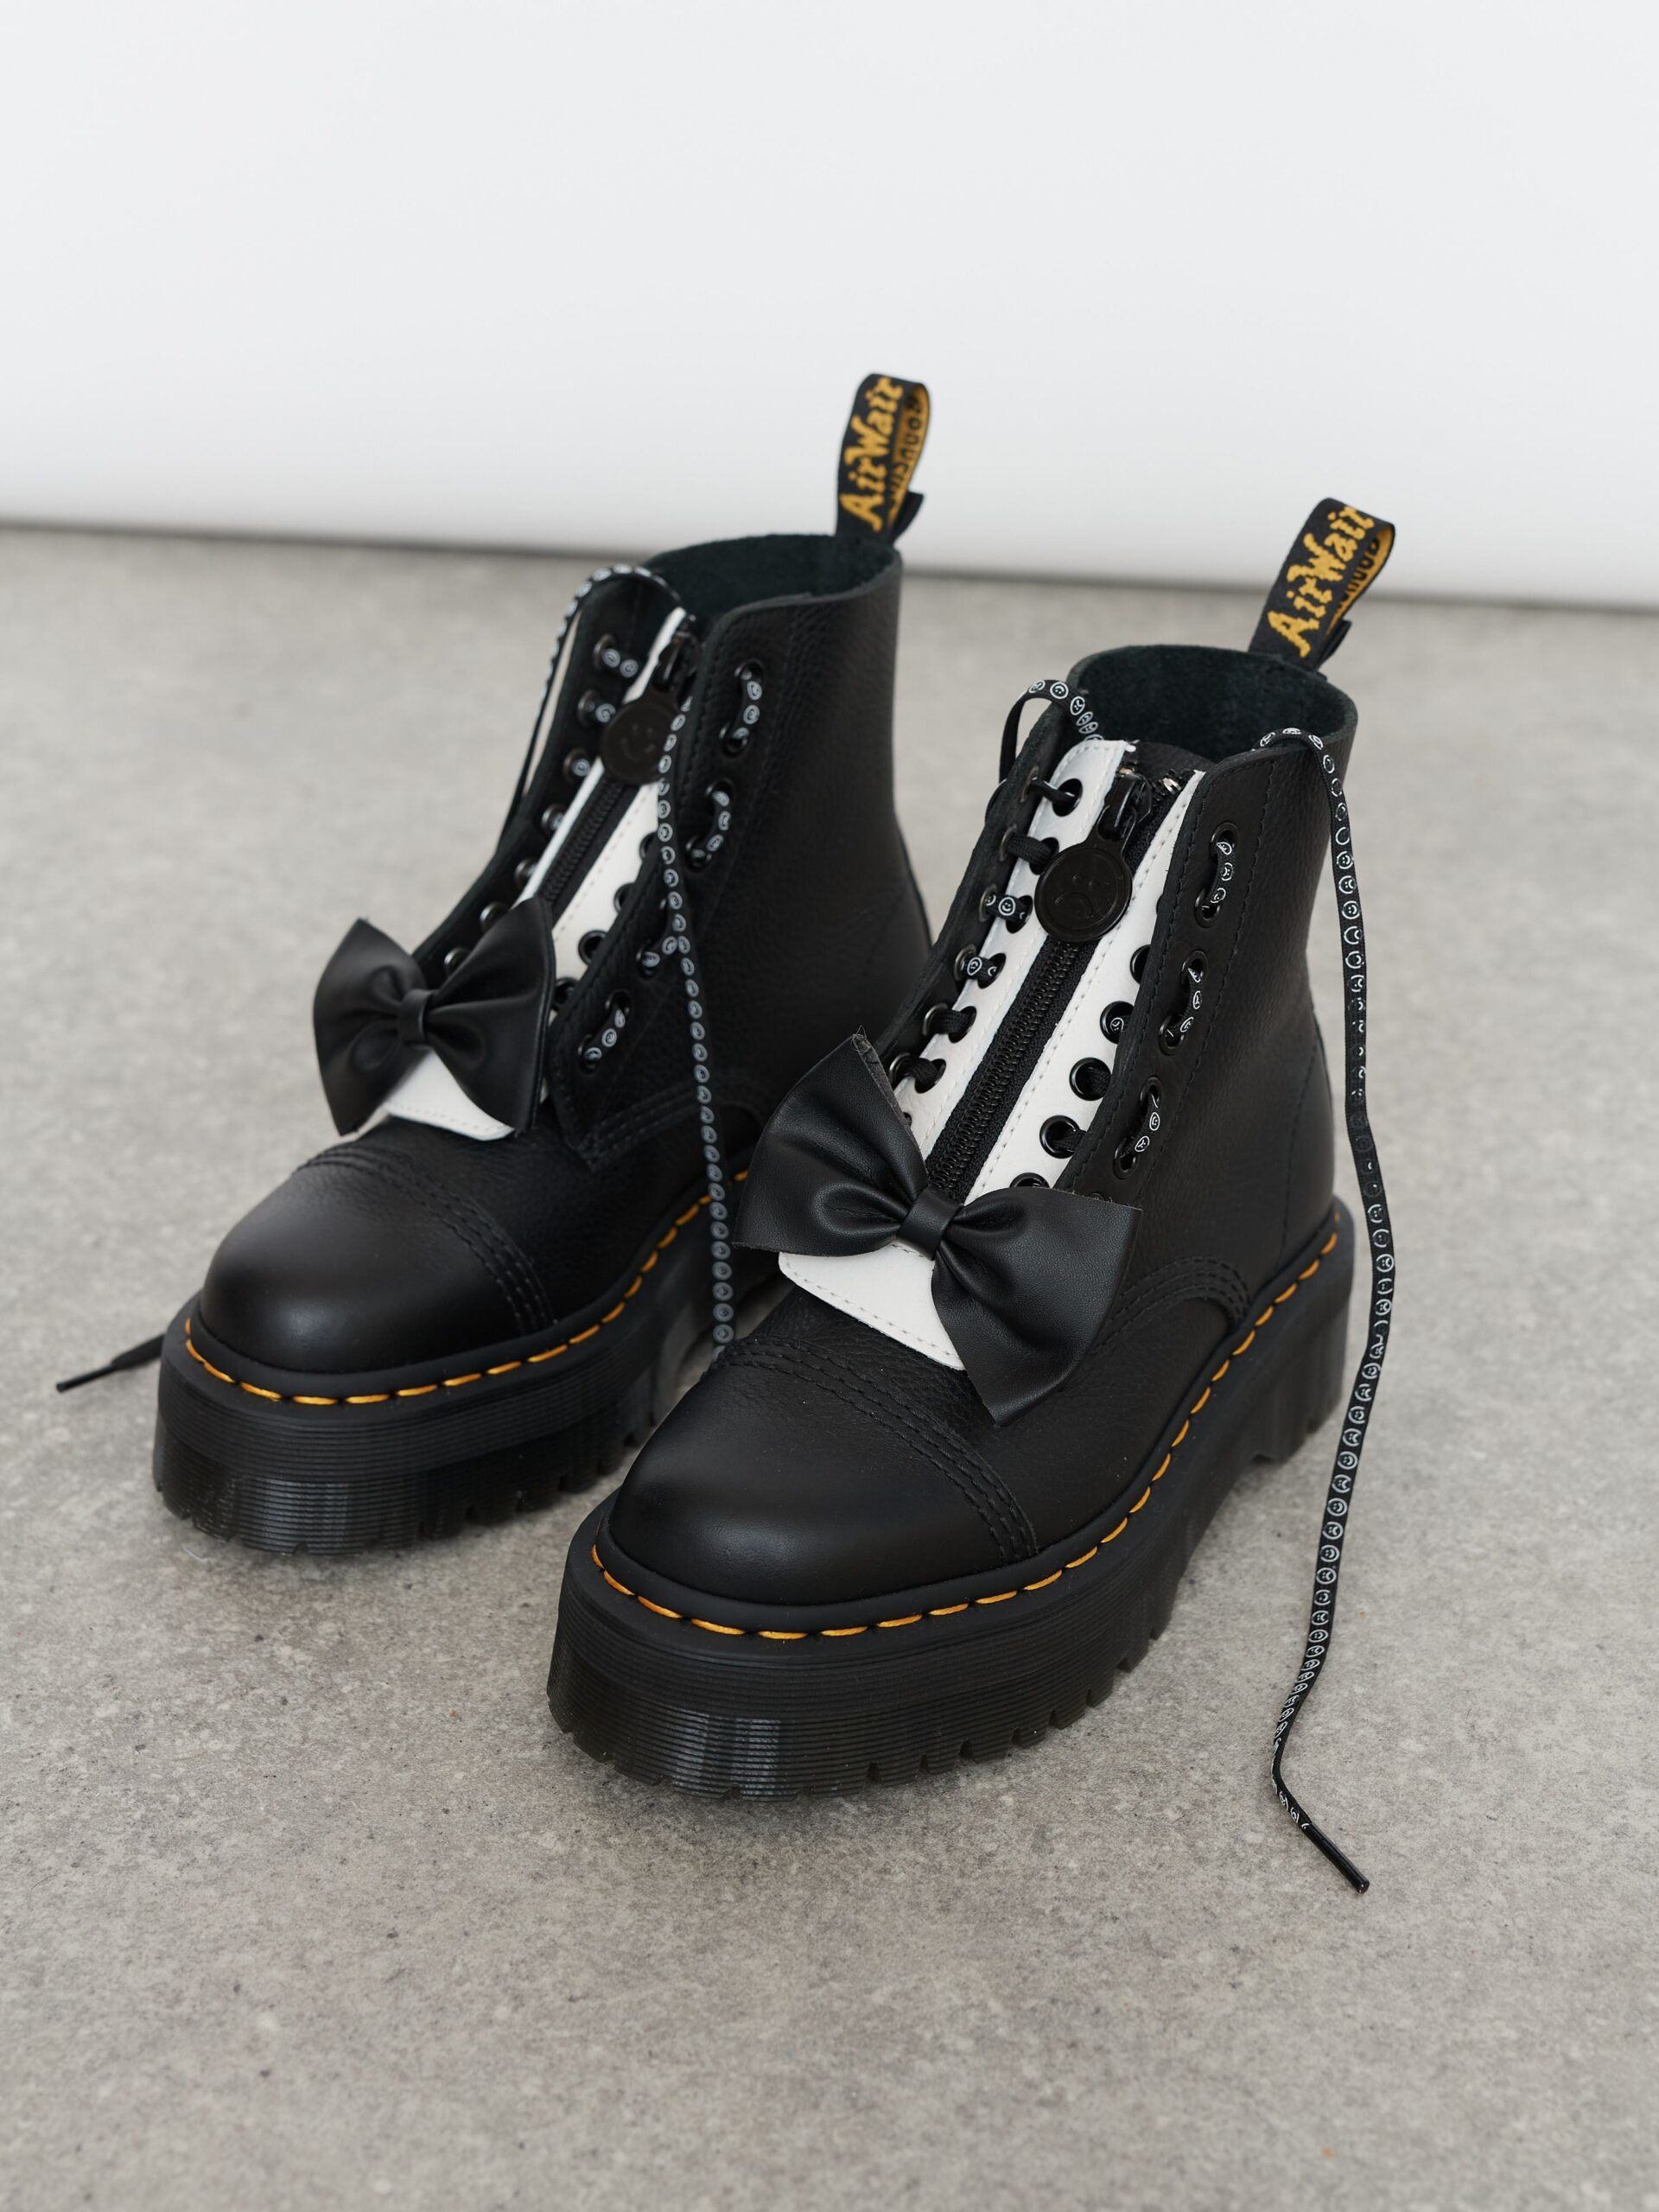 Only 39.60 usd for Dr. Martens x LO Sinclair Happy Sad Platform Boots  Online at the Shop